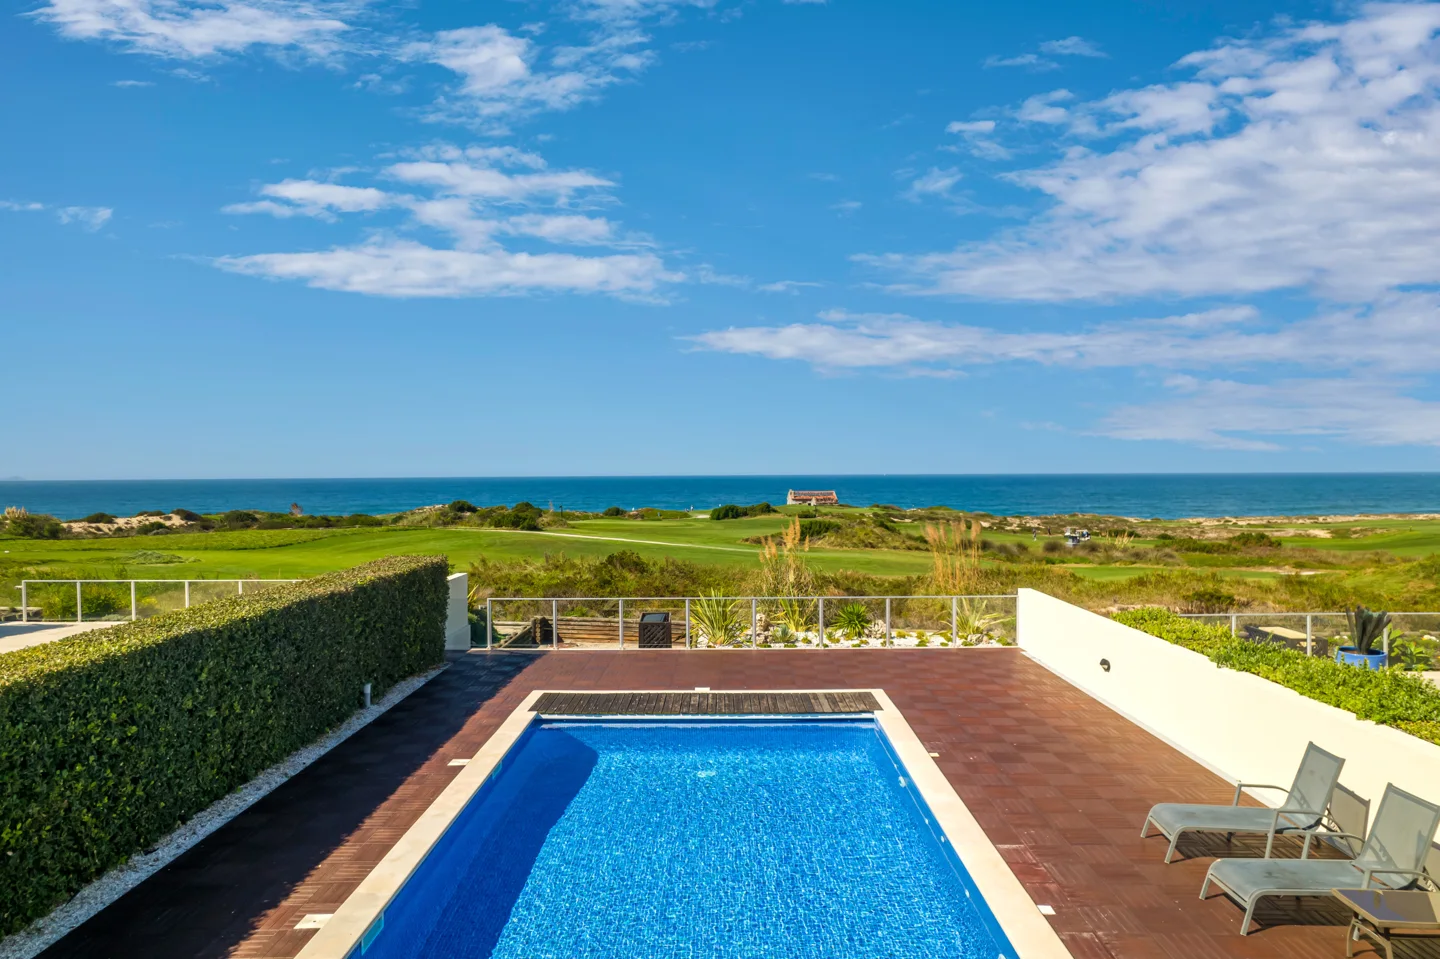 Discover Your Dream Villa with Uninterrupted Views of the Beach & Ocean